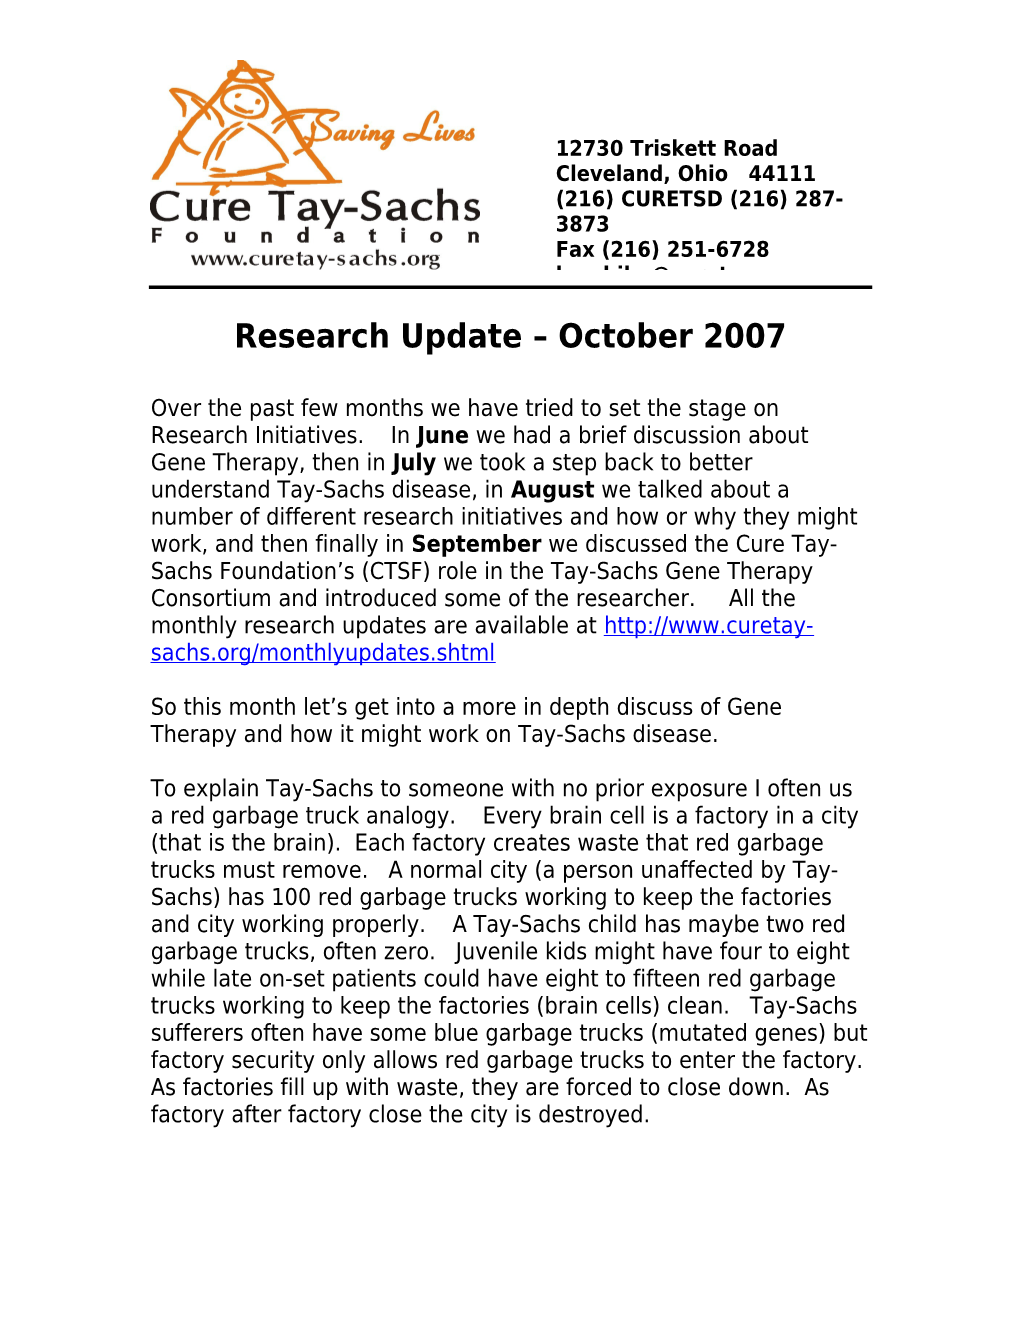 Research Update October 2007